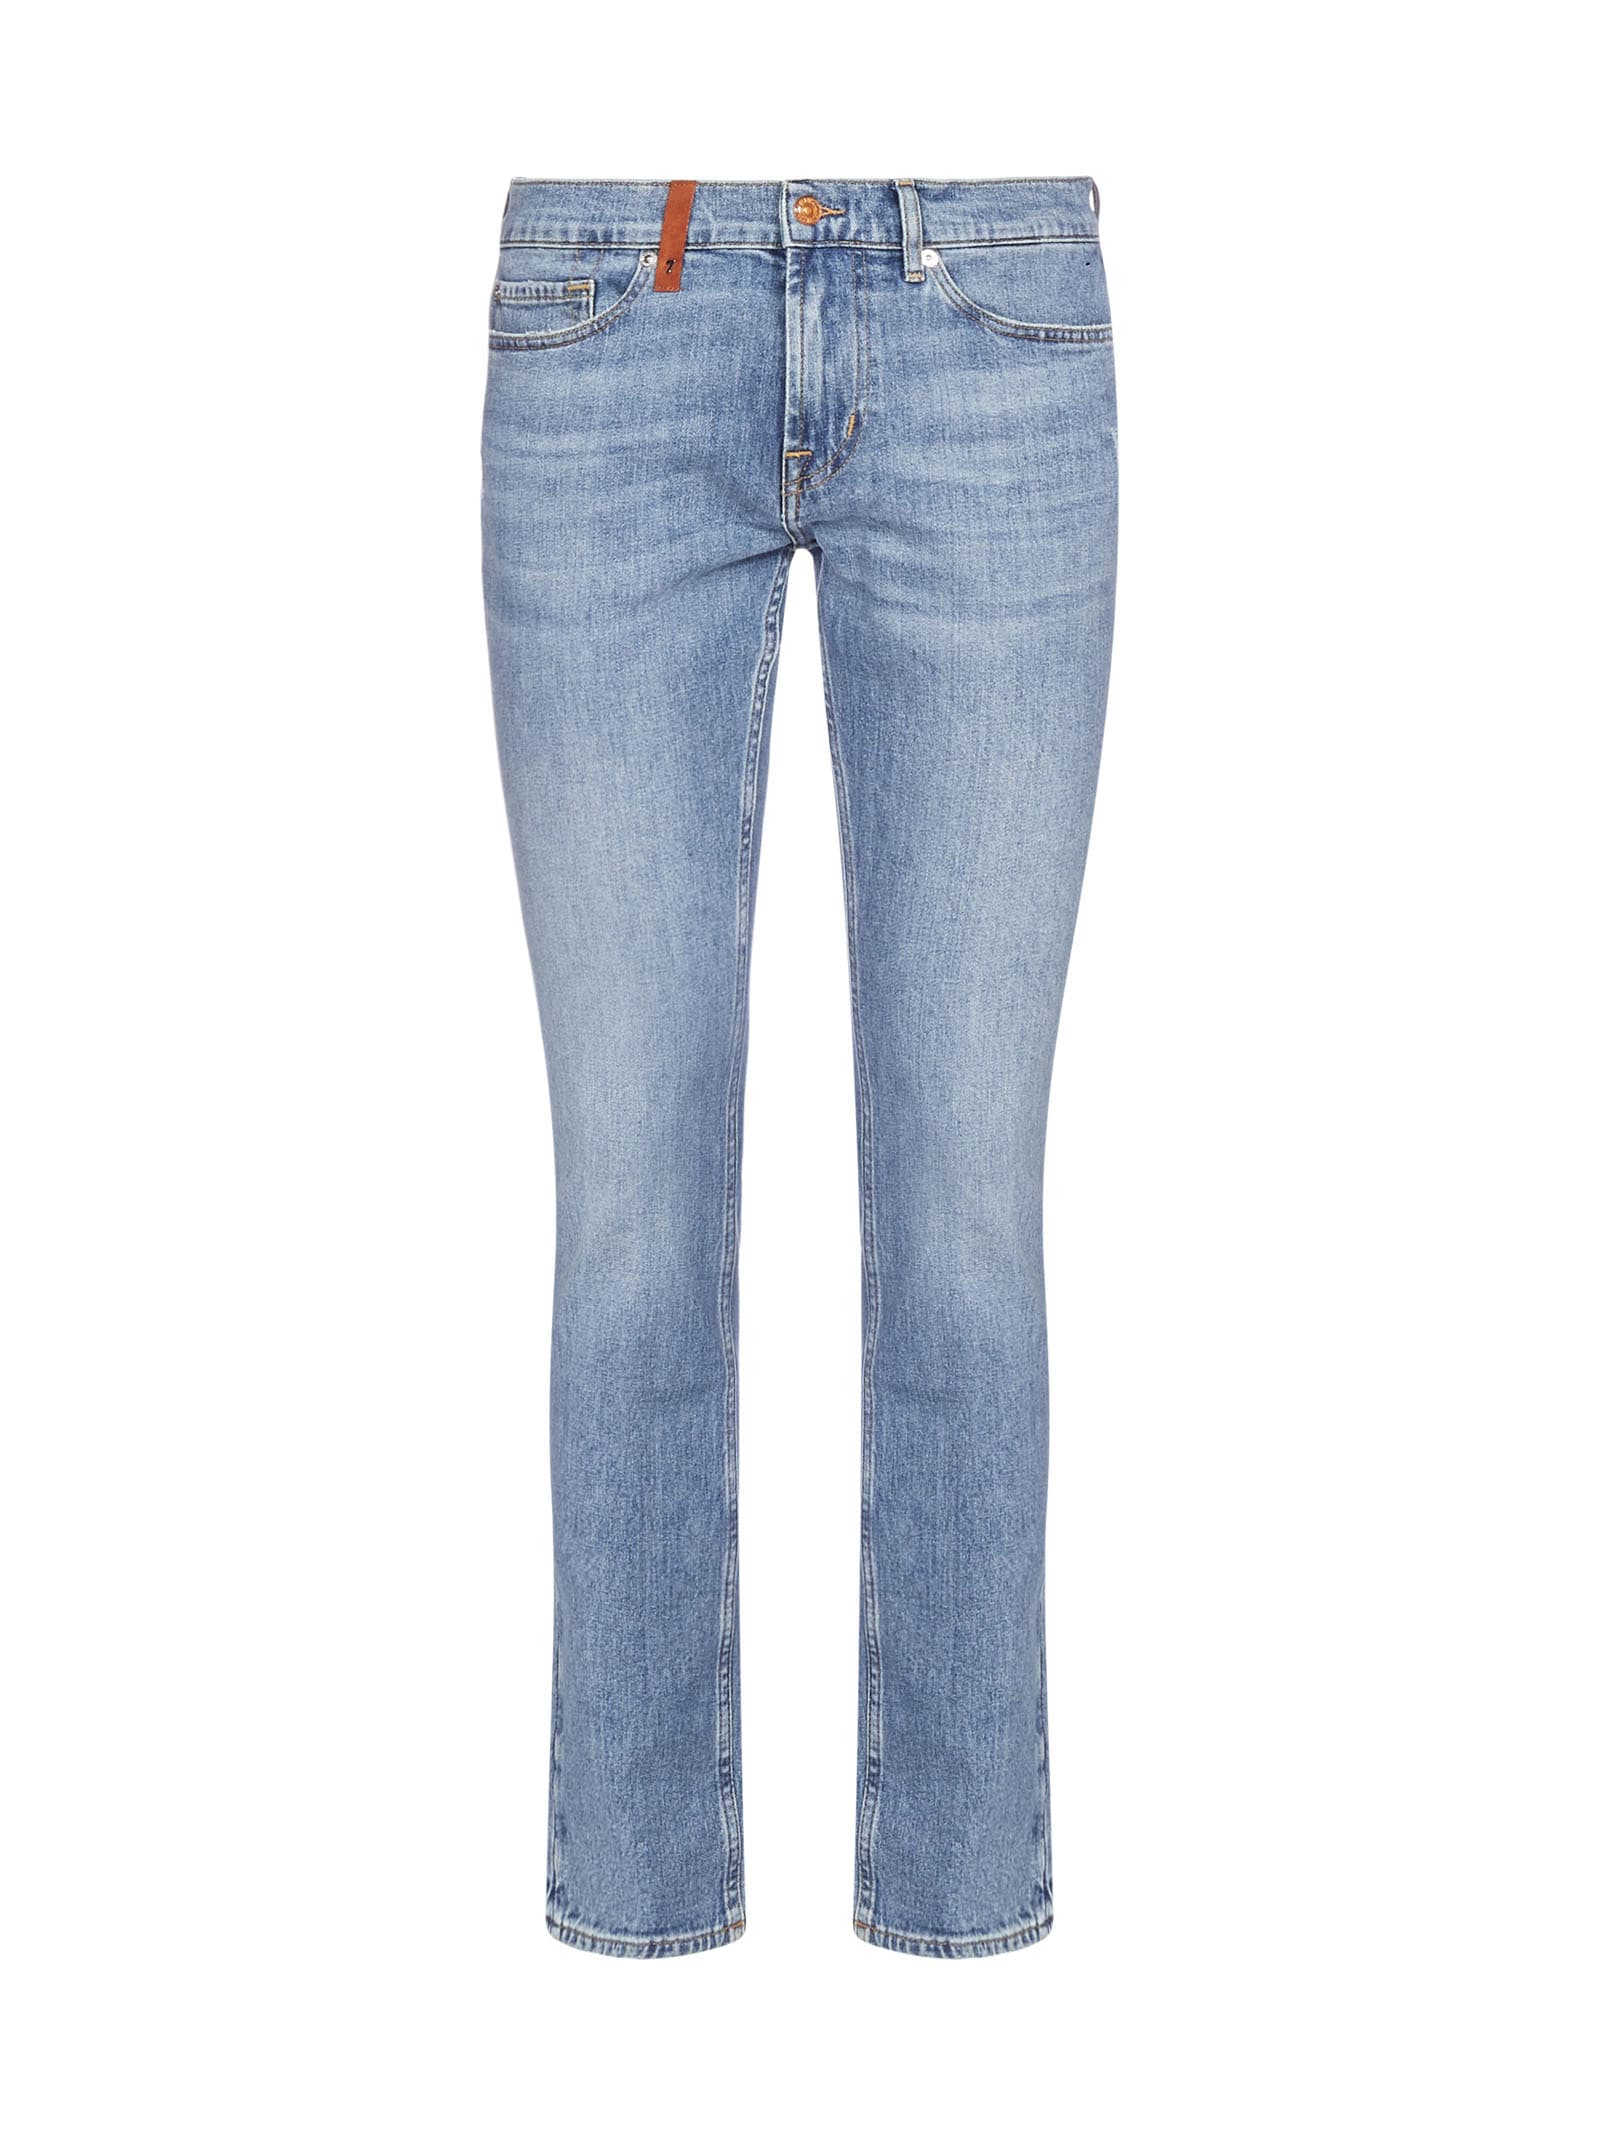 7 For All Mankind Ronnie Special Edition Pyxus Jeans